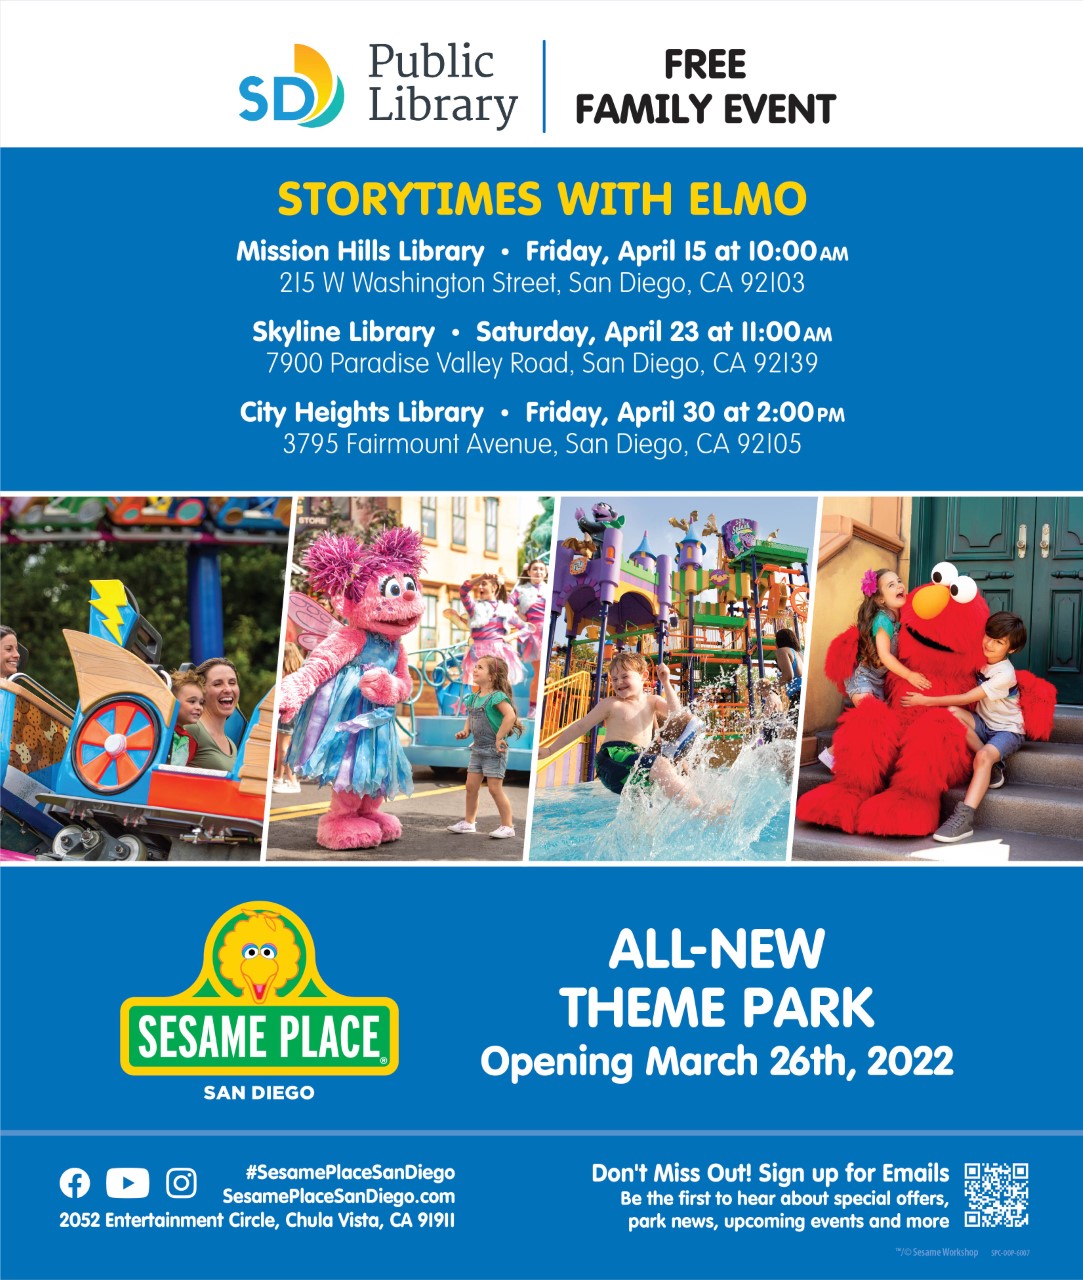 Flyer with photos of Elmo and other Sesame Street characters